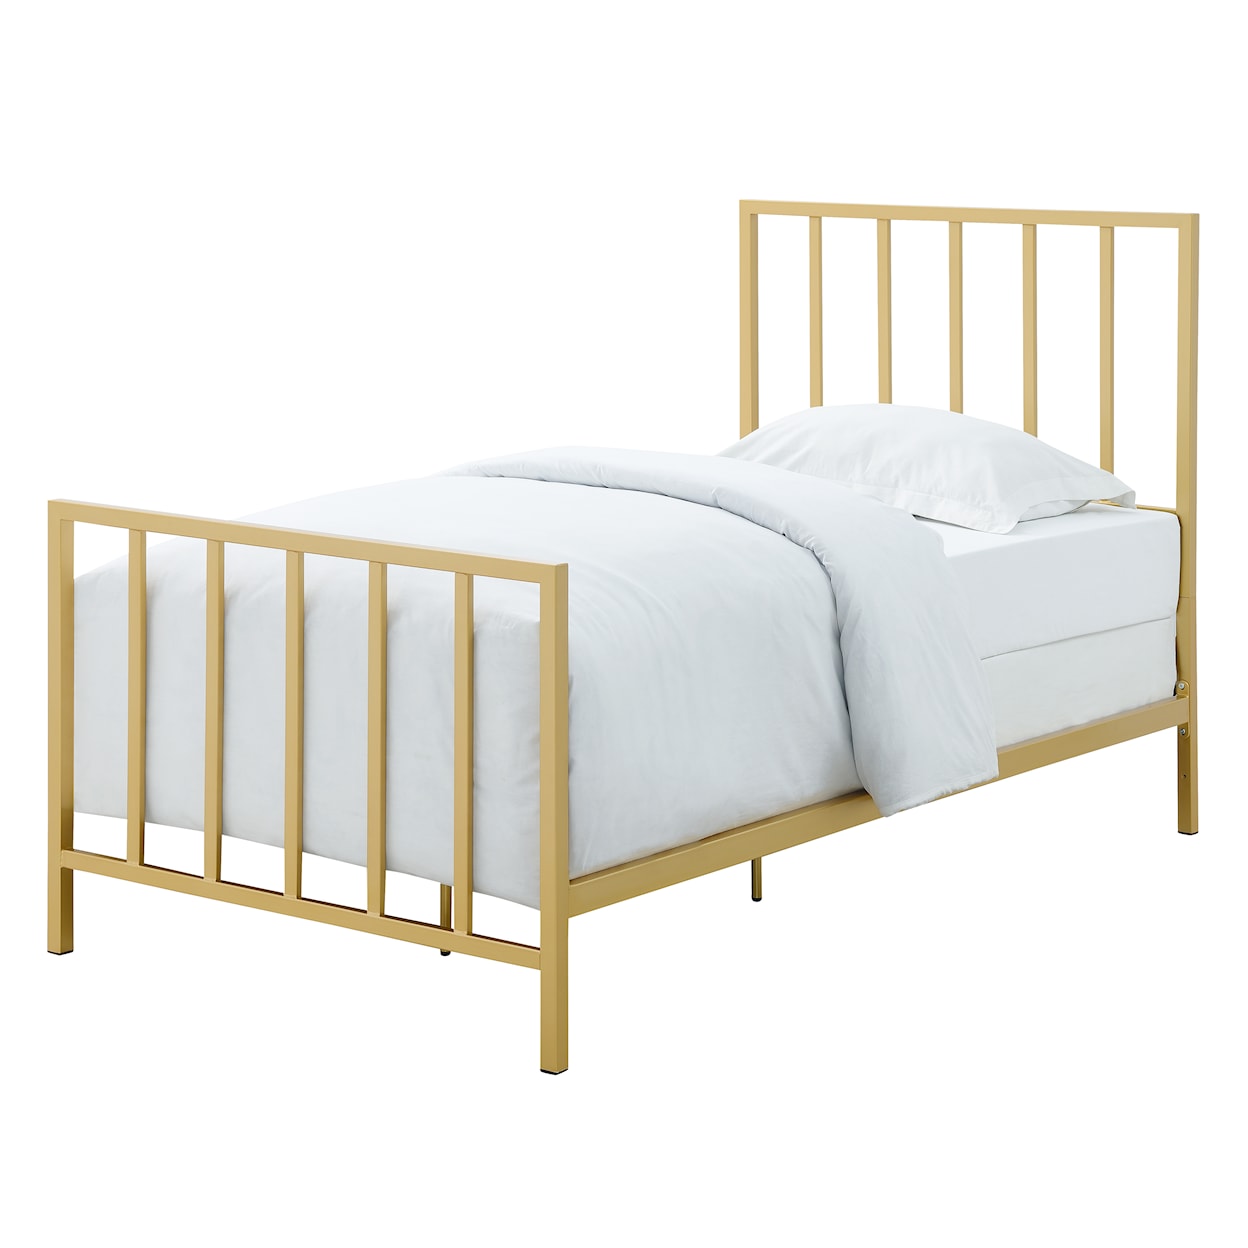 Accentrics Home Fashion Beds Twin Metal Bed